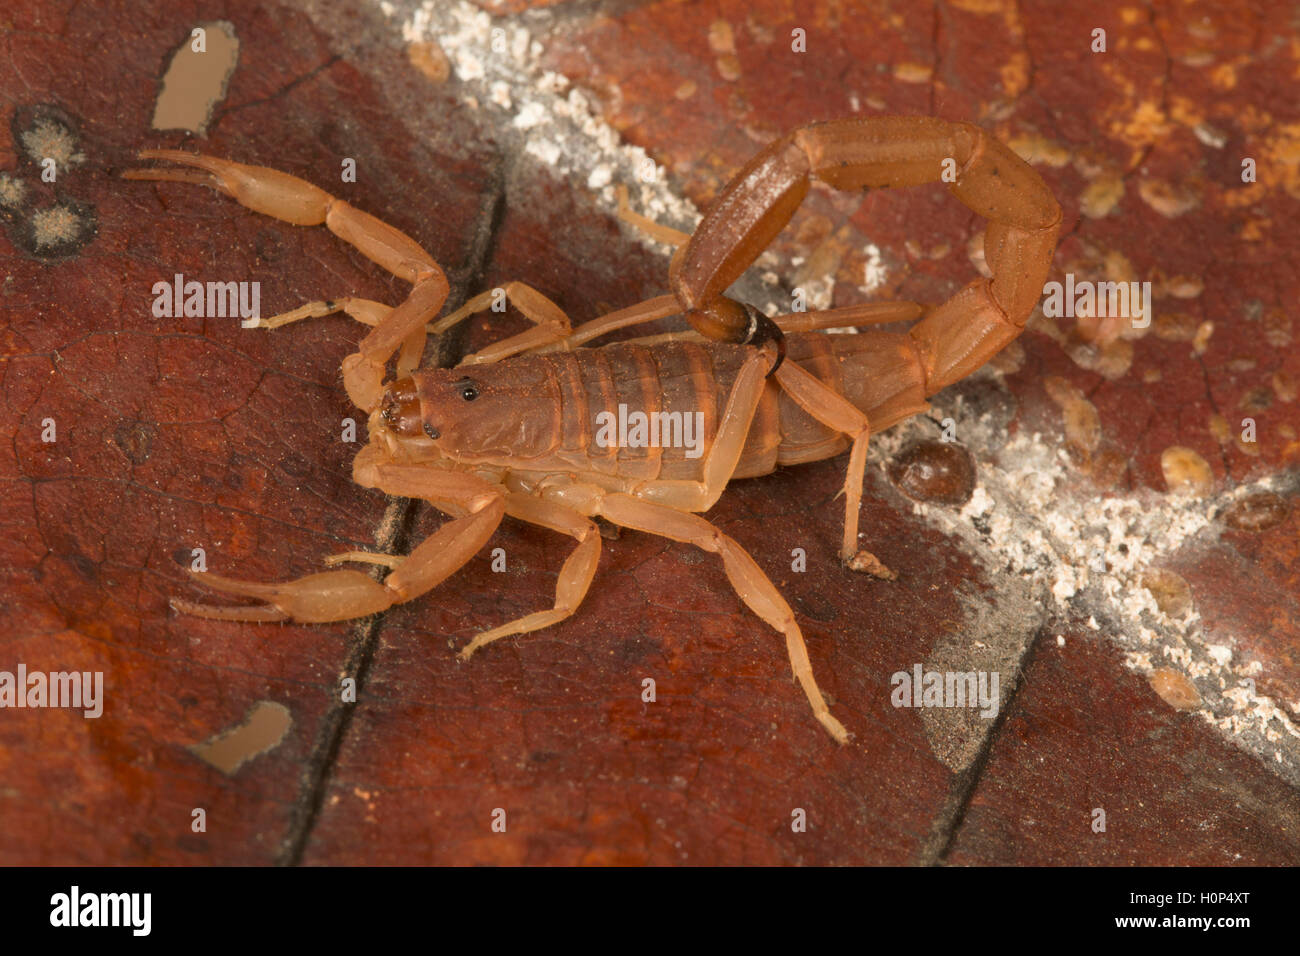 Lychas tricarinatus Ponducherry. Buthid scorpion with three mesosomal carina that distinguish it from other members of the genus Stock Photo